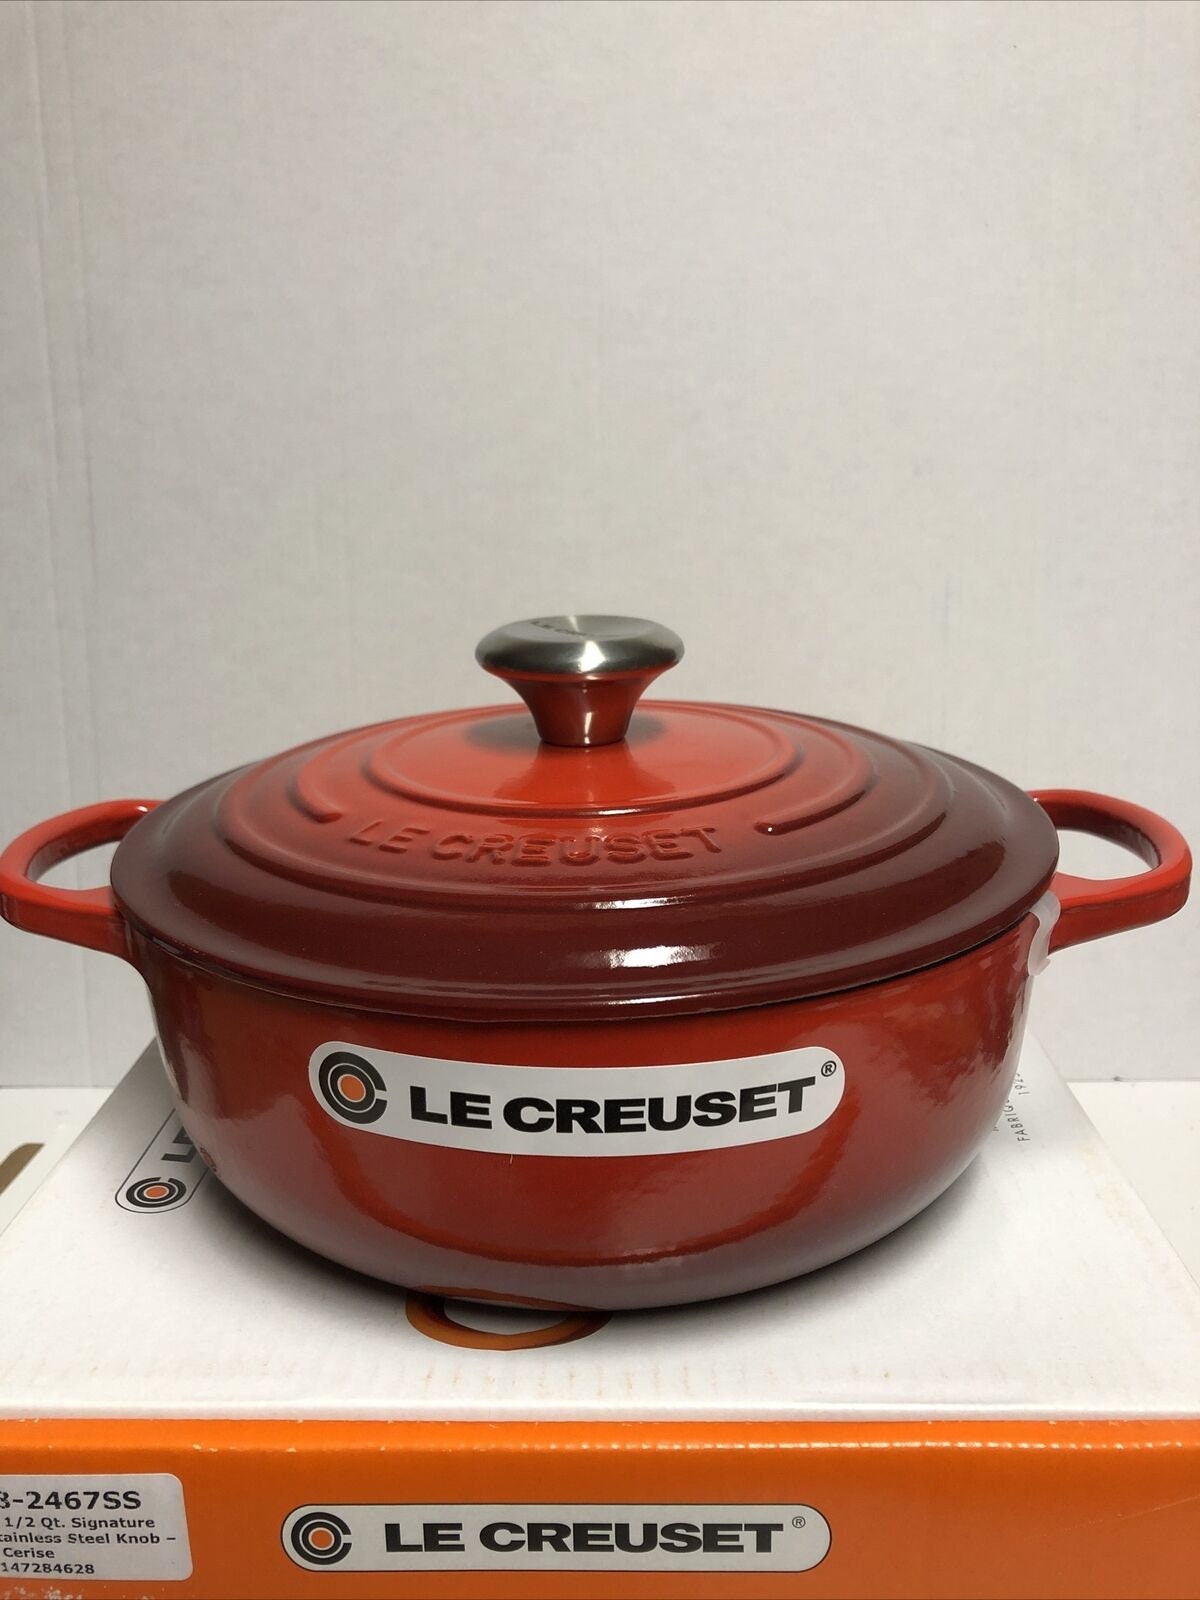 Lodge 7.5-Qt. Cherry on Top Red USA Enameled Cast Iron Dutch Oven